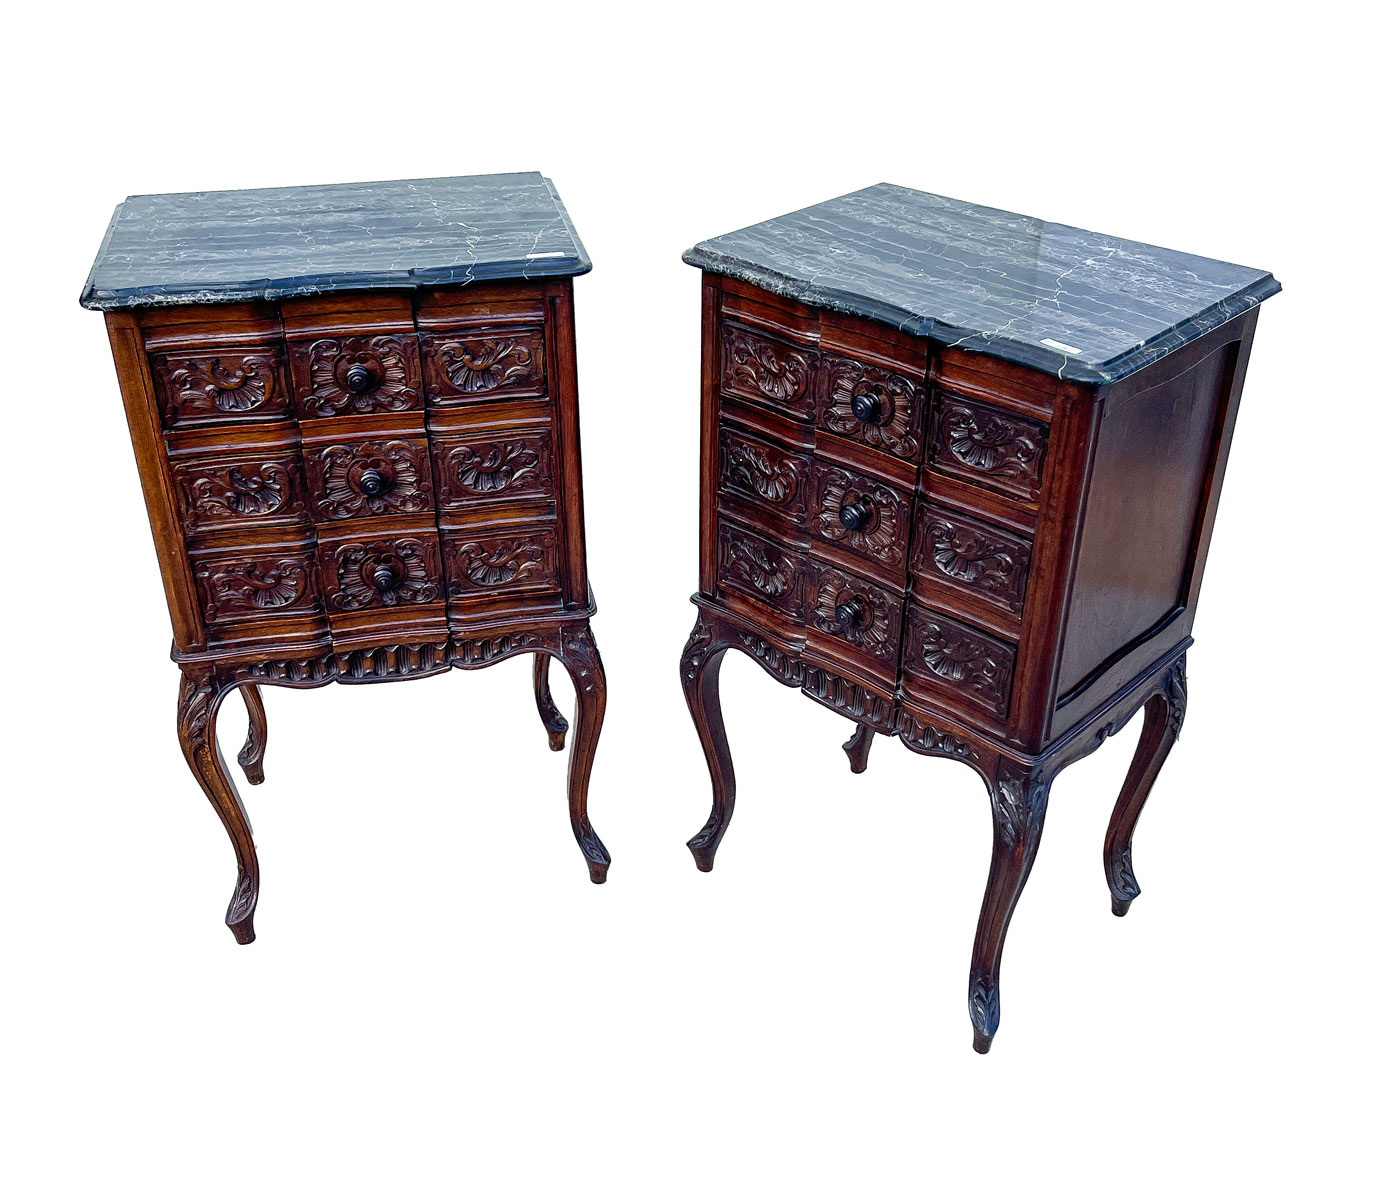 PAIR OF CARVED MARBLE TOP CHESTS: